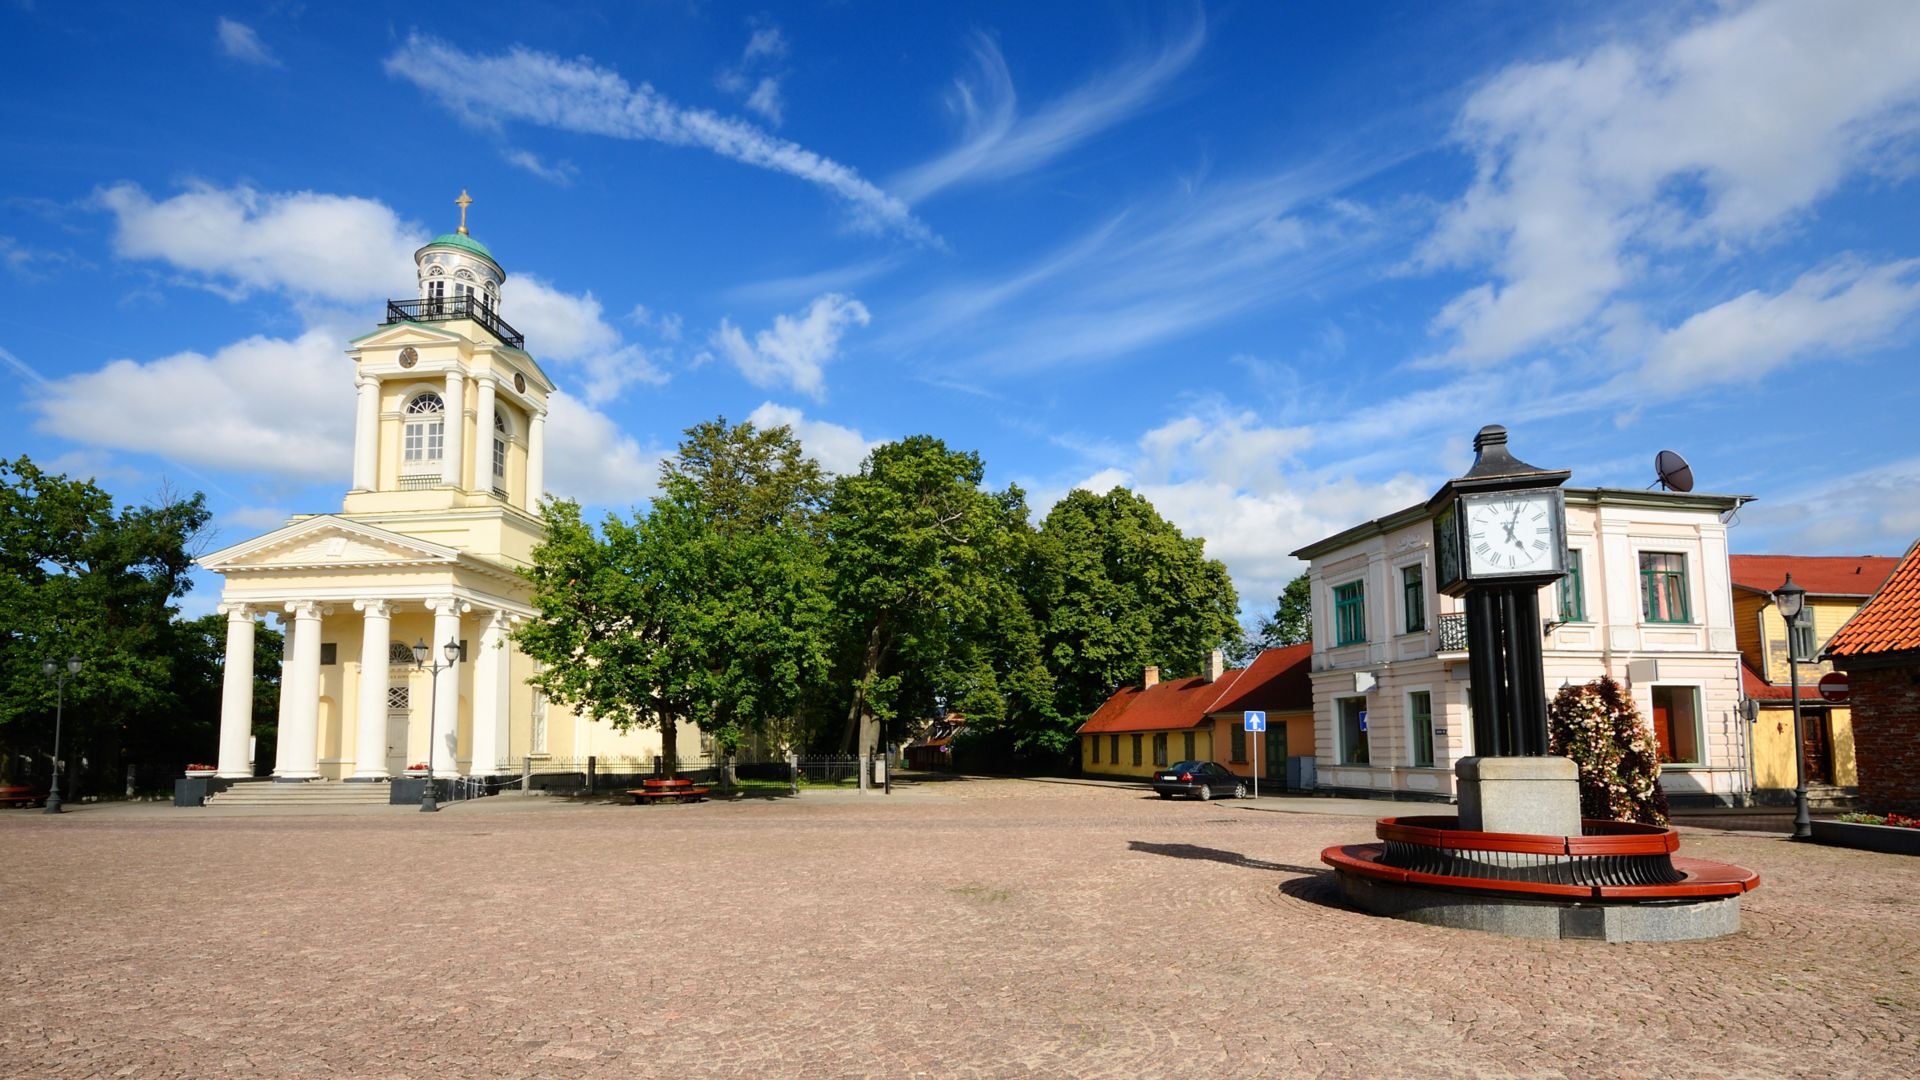 Catholic church in the old part of Ventspils.